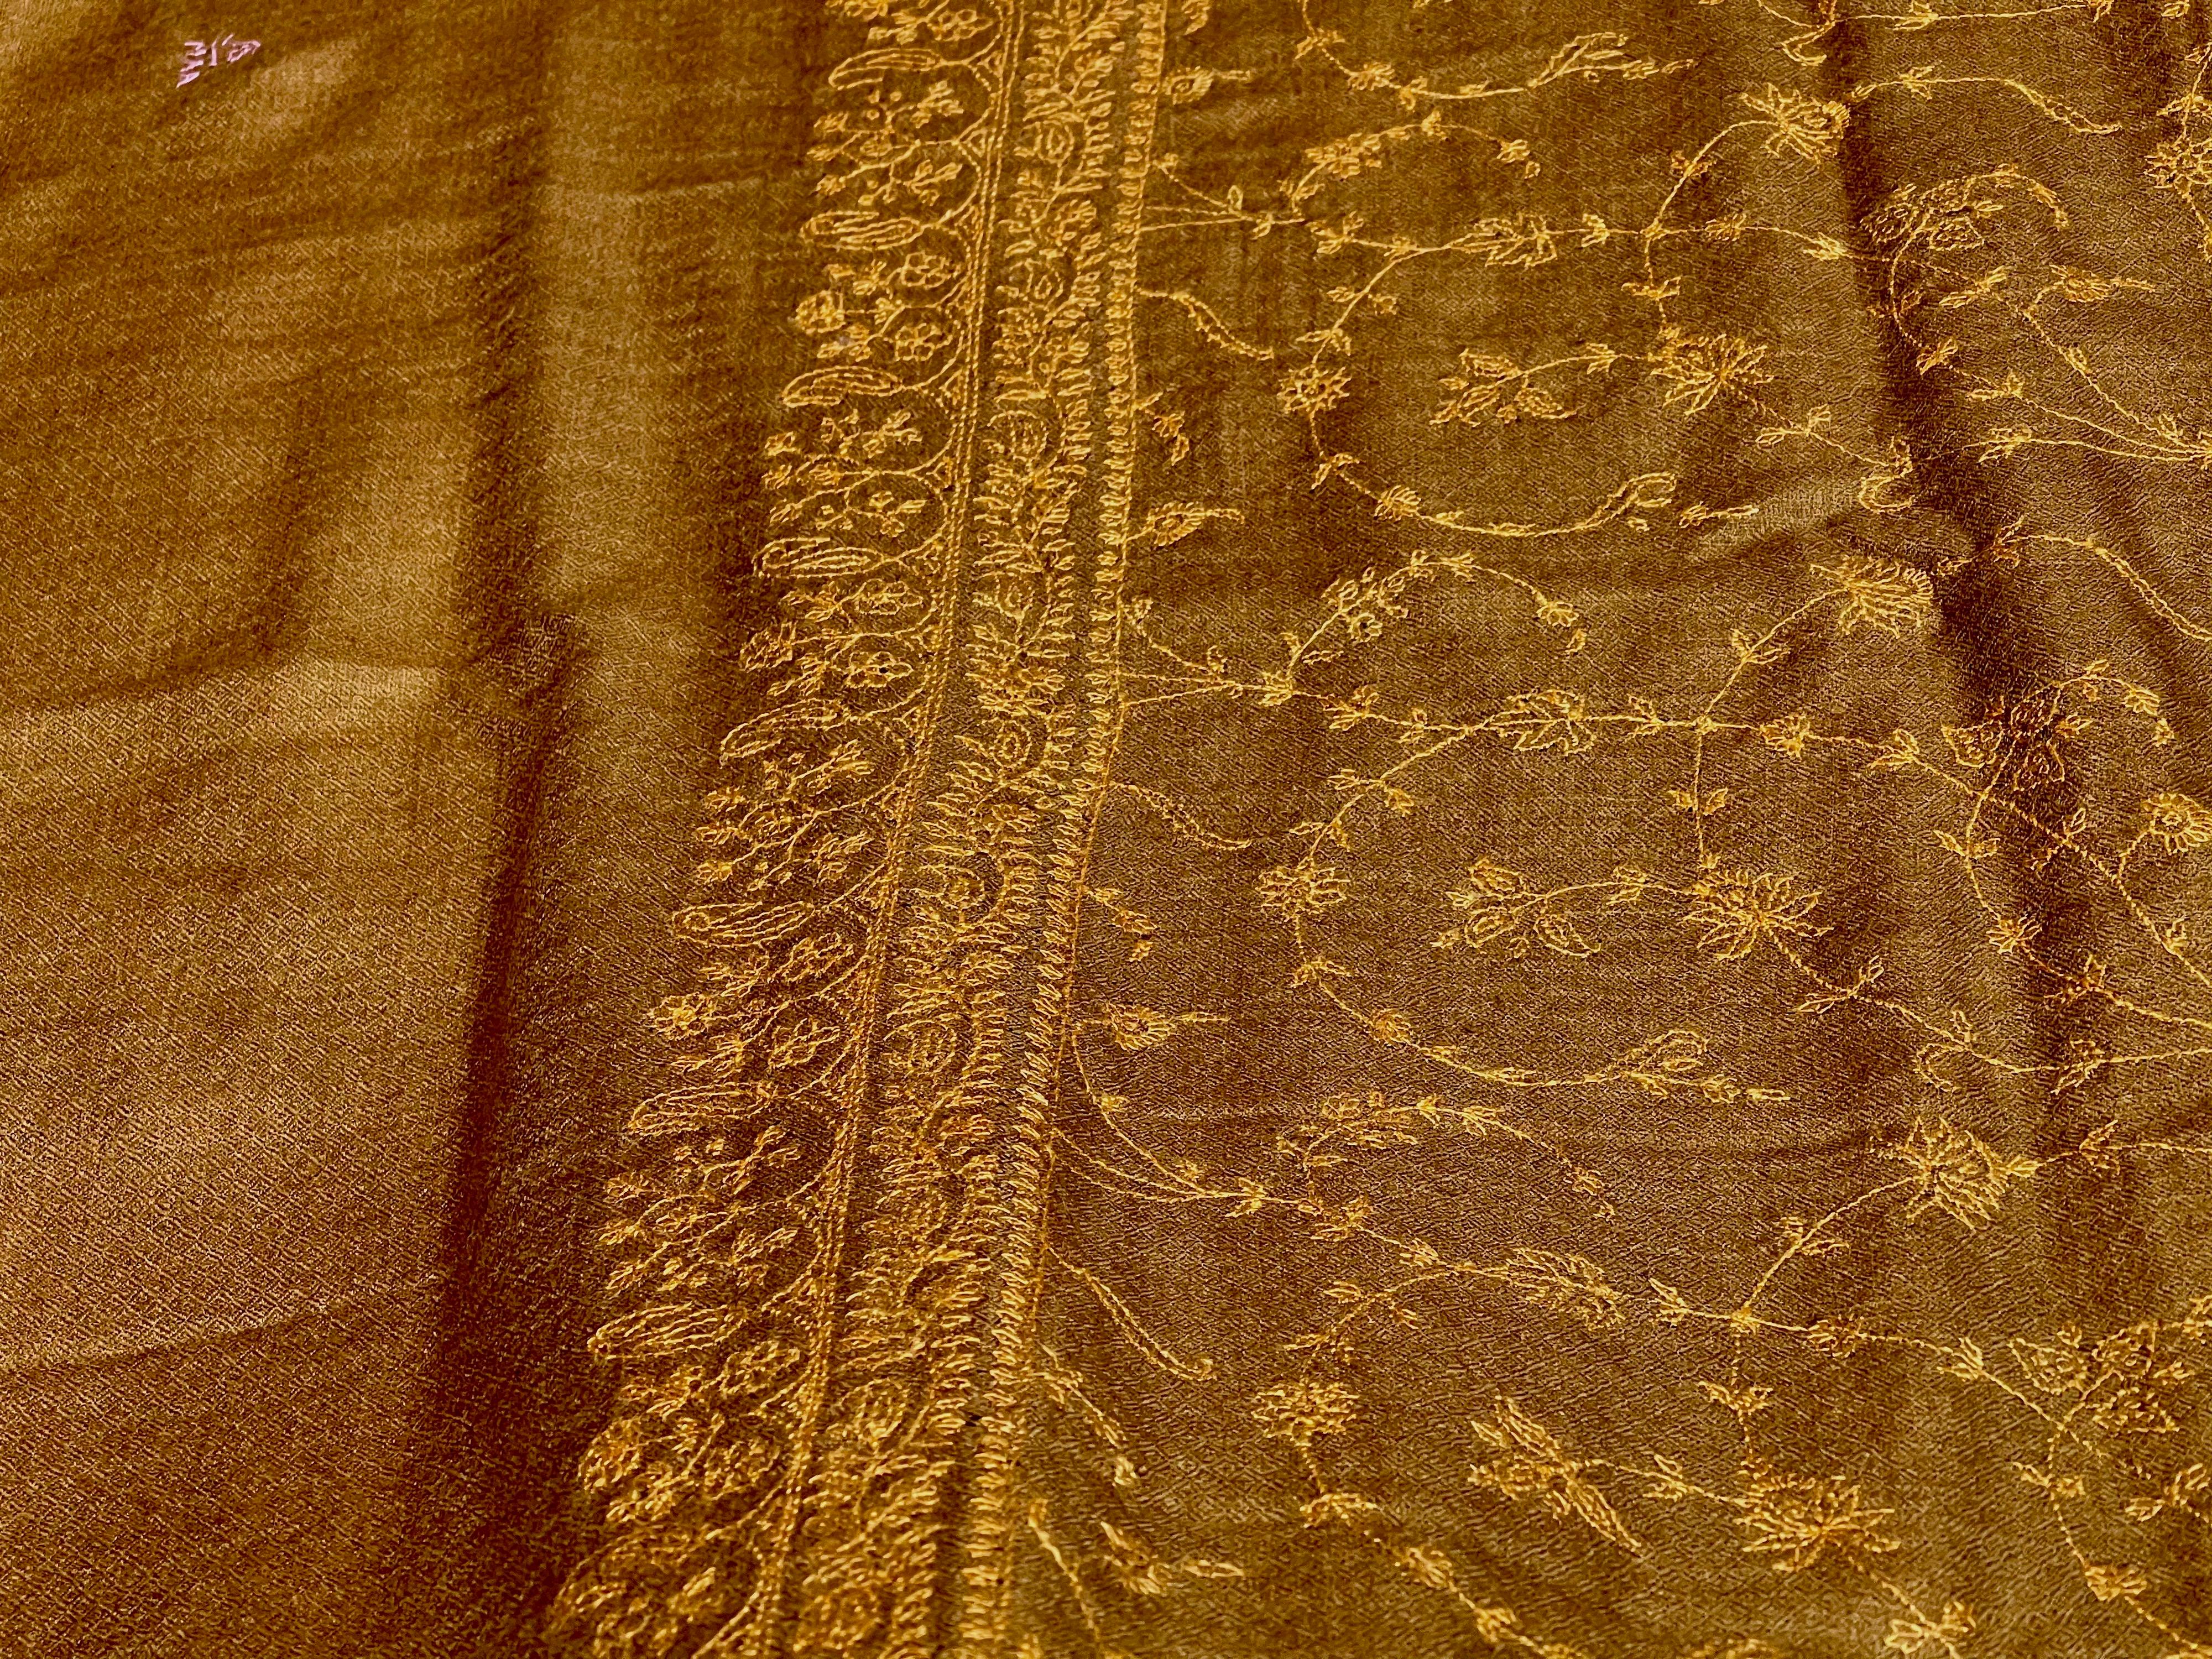 Hand Embroidered 100% Cashmere Pashmina Shawl Golden Brown Made in Kashmir  3